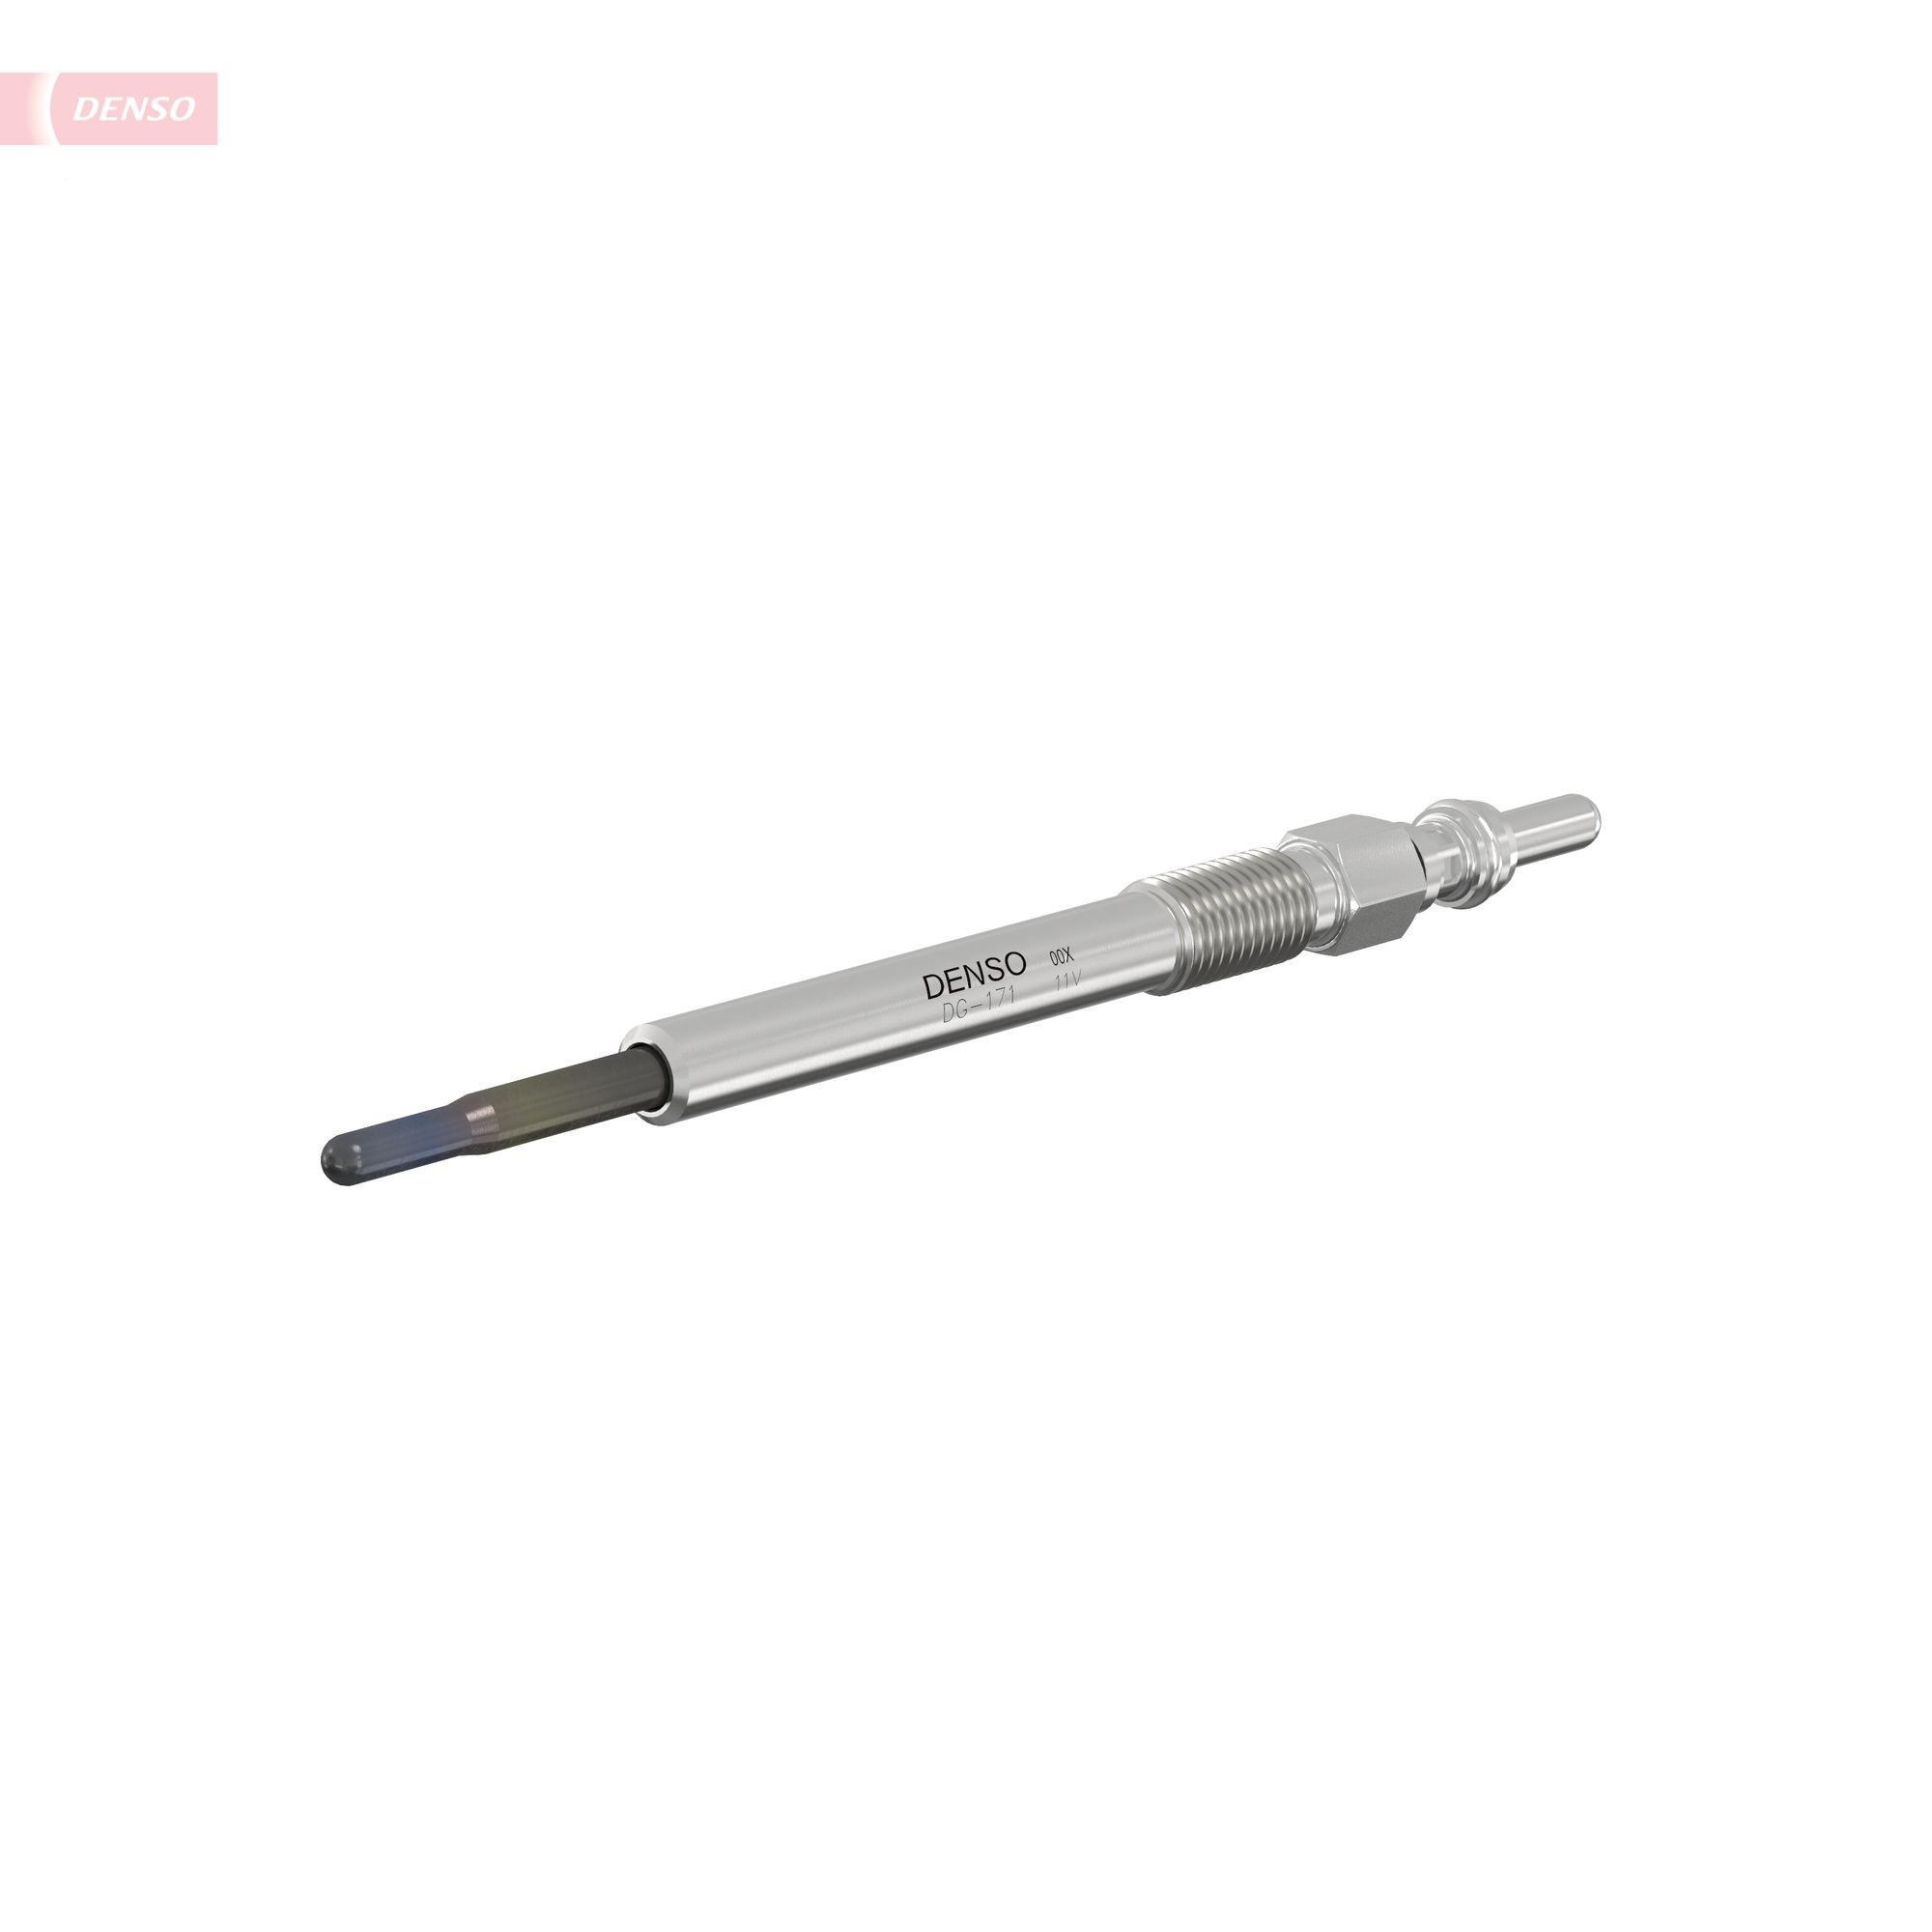 Glow plug DENSO DG-171 - Fiat Strada Pickup (278) Ignition and preheating spare parts order